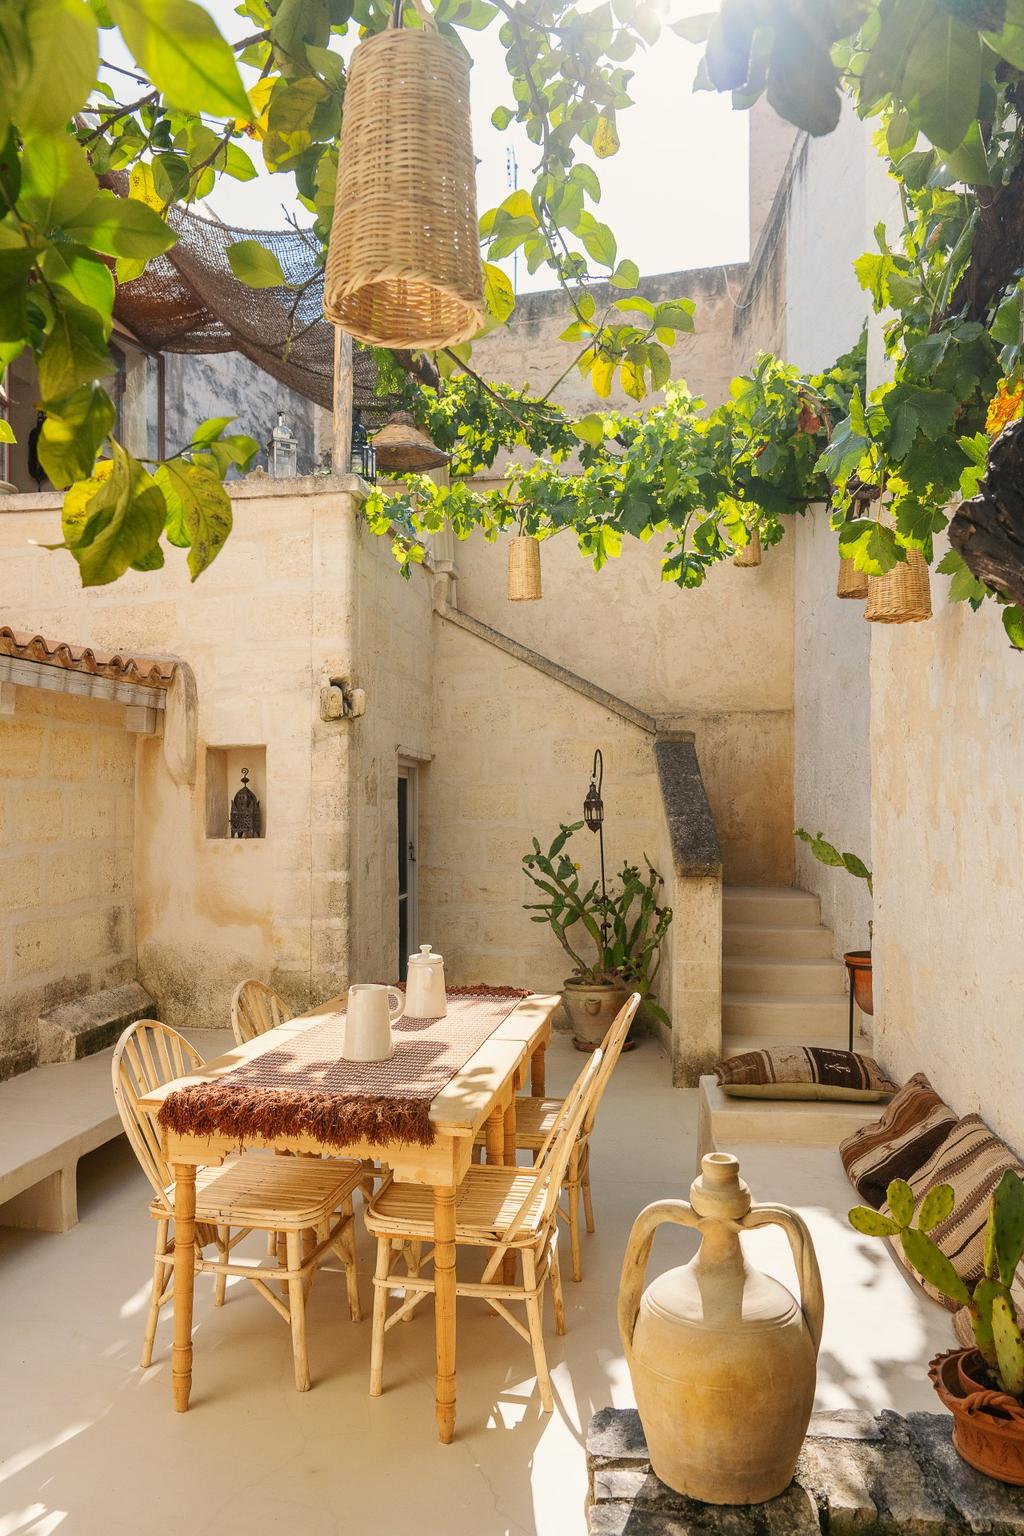 4 Easy Ways to Infuse Your Home Decor with Sun-Drenched Sicilian Style